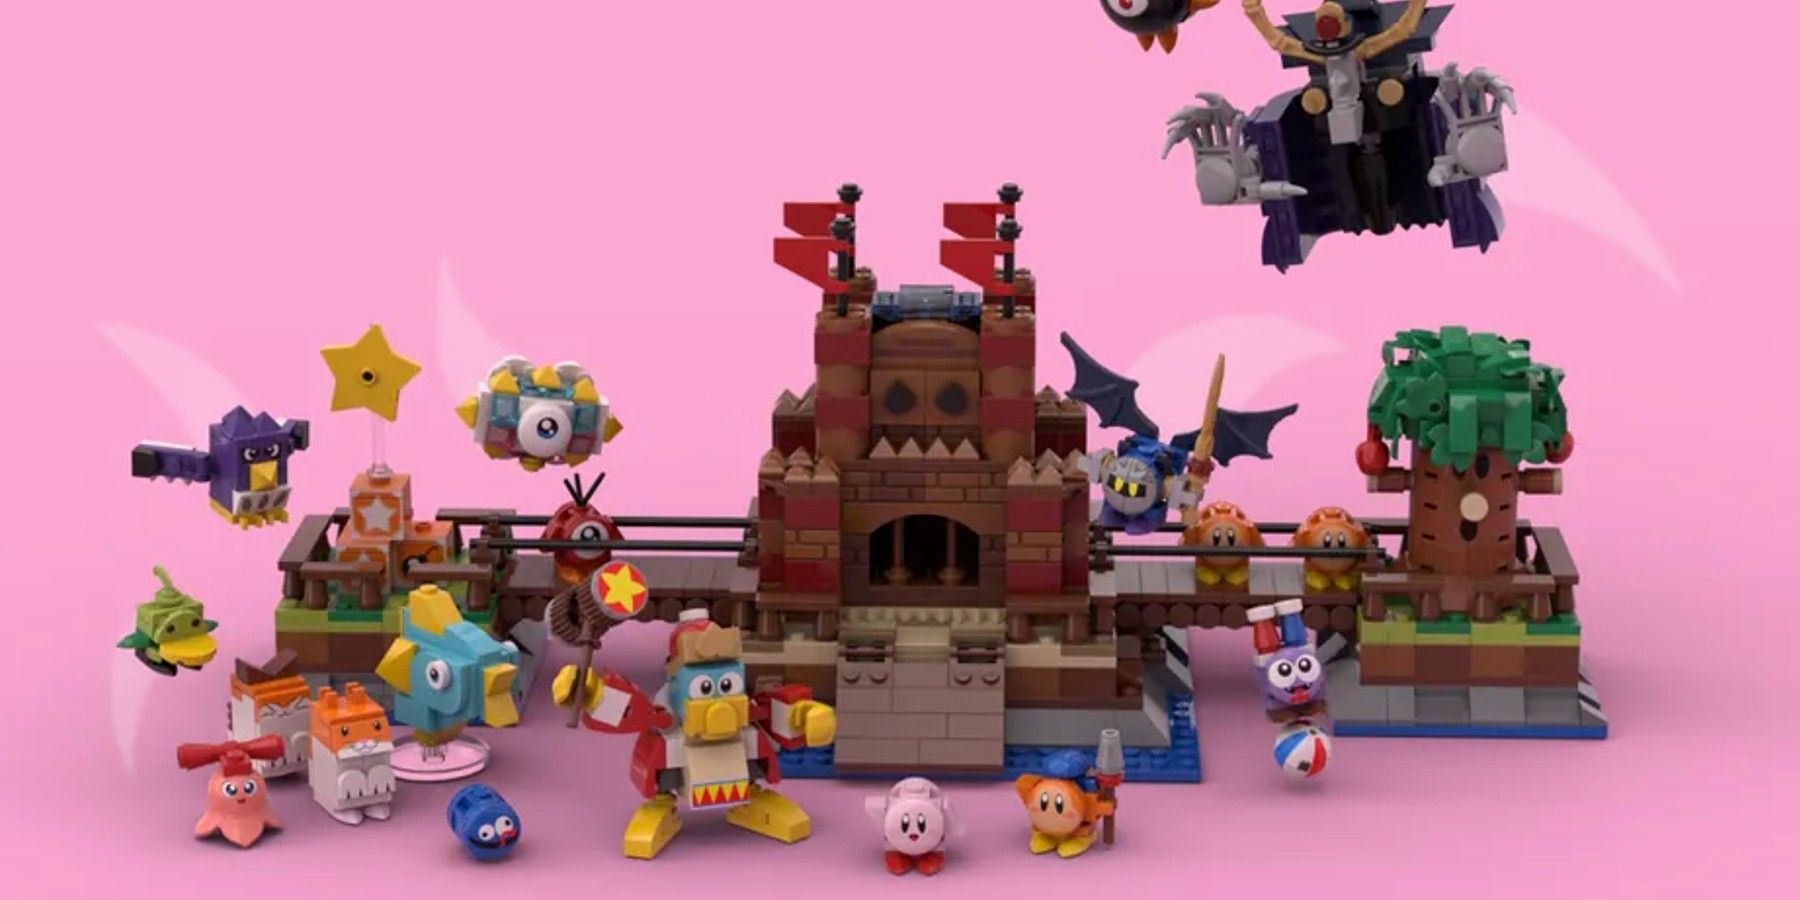 Kirbys Dream Land LEGO Set Could Become Official